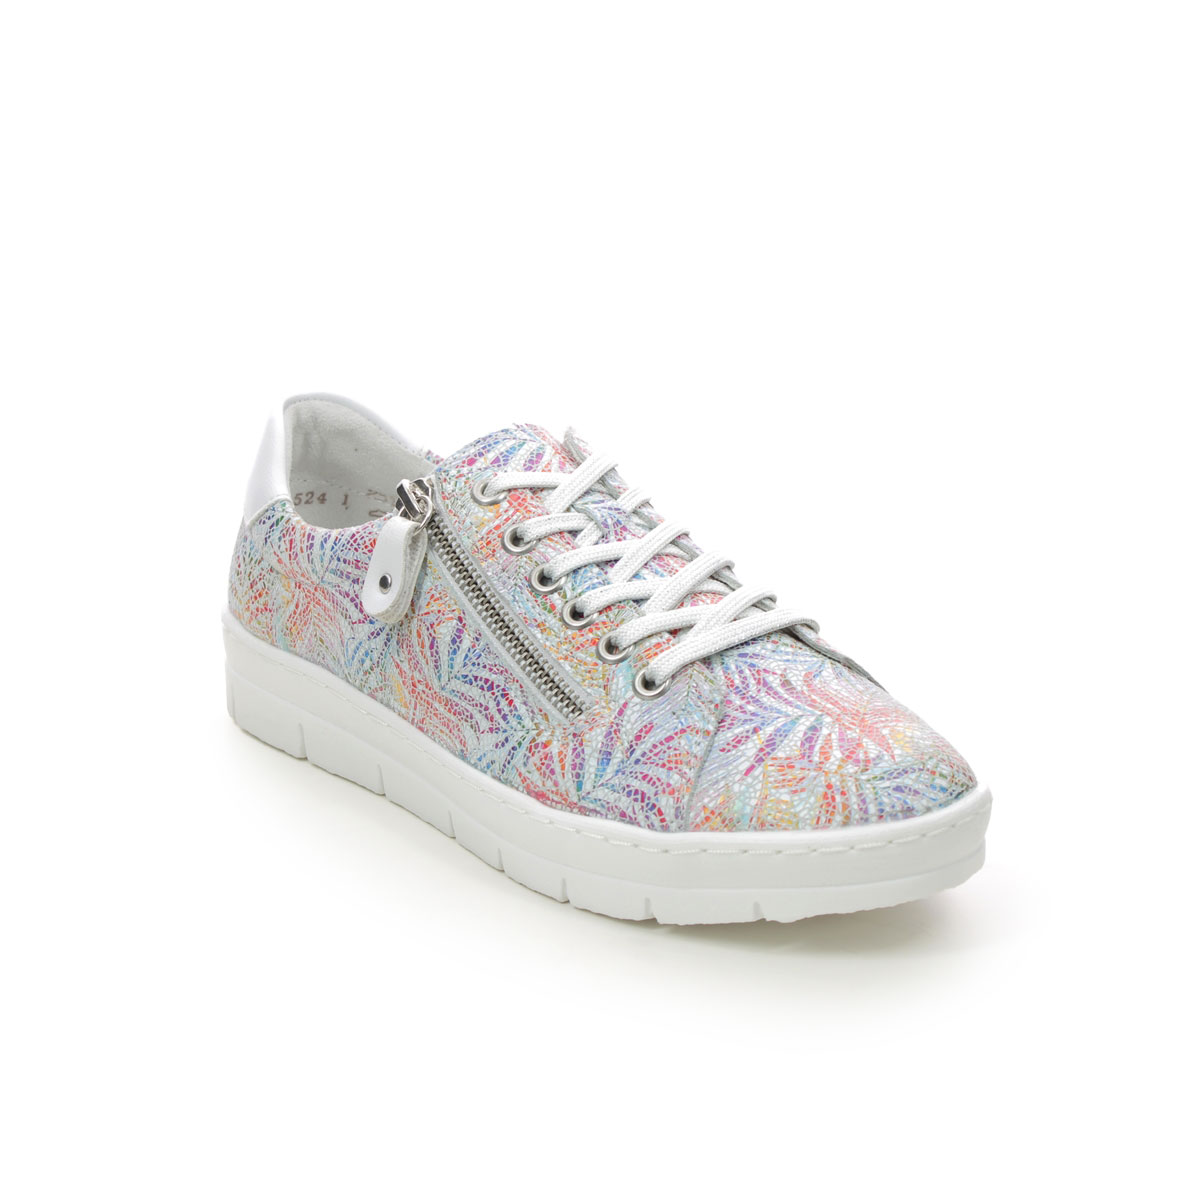 Remonte Ravenna 11 Floral Print Womens Trainers D5800-88 In Size 40 In Plain Floral Print